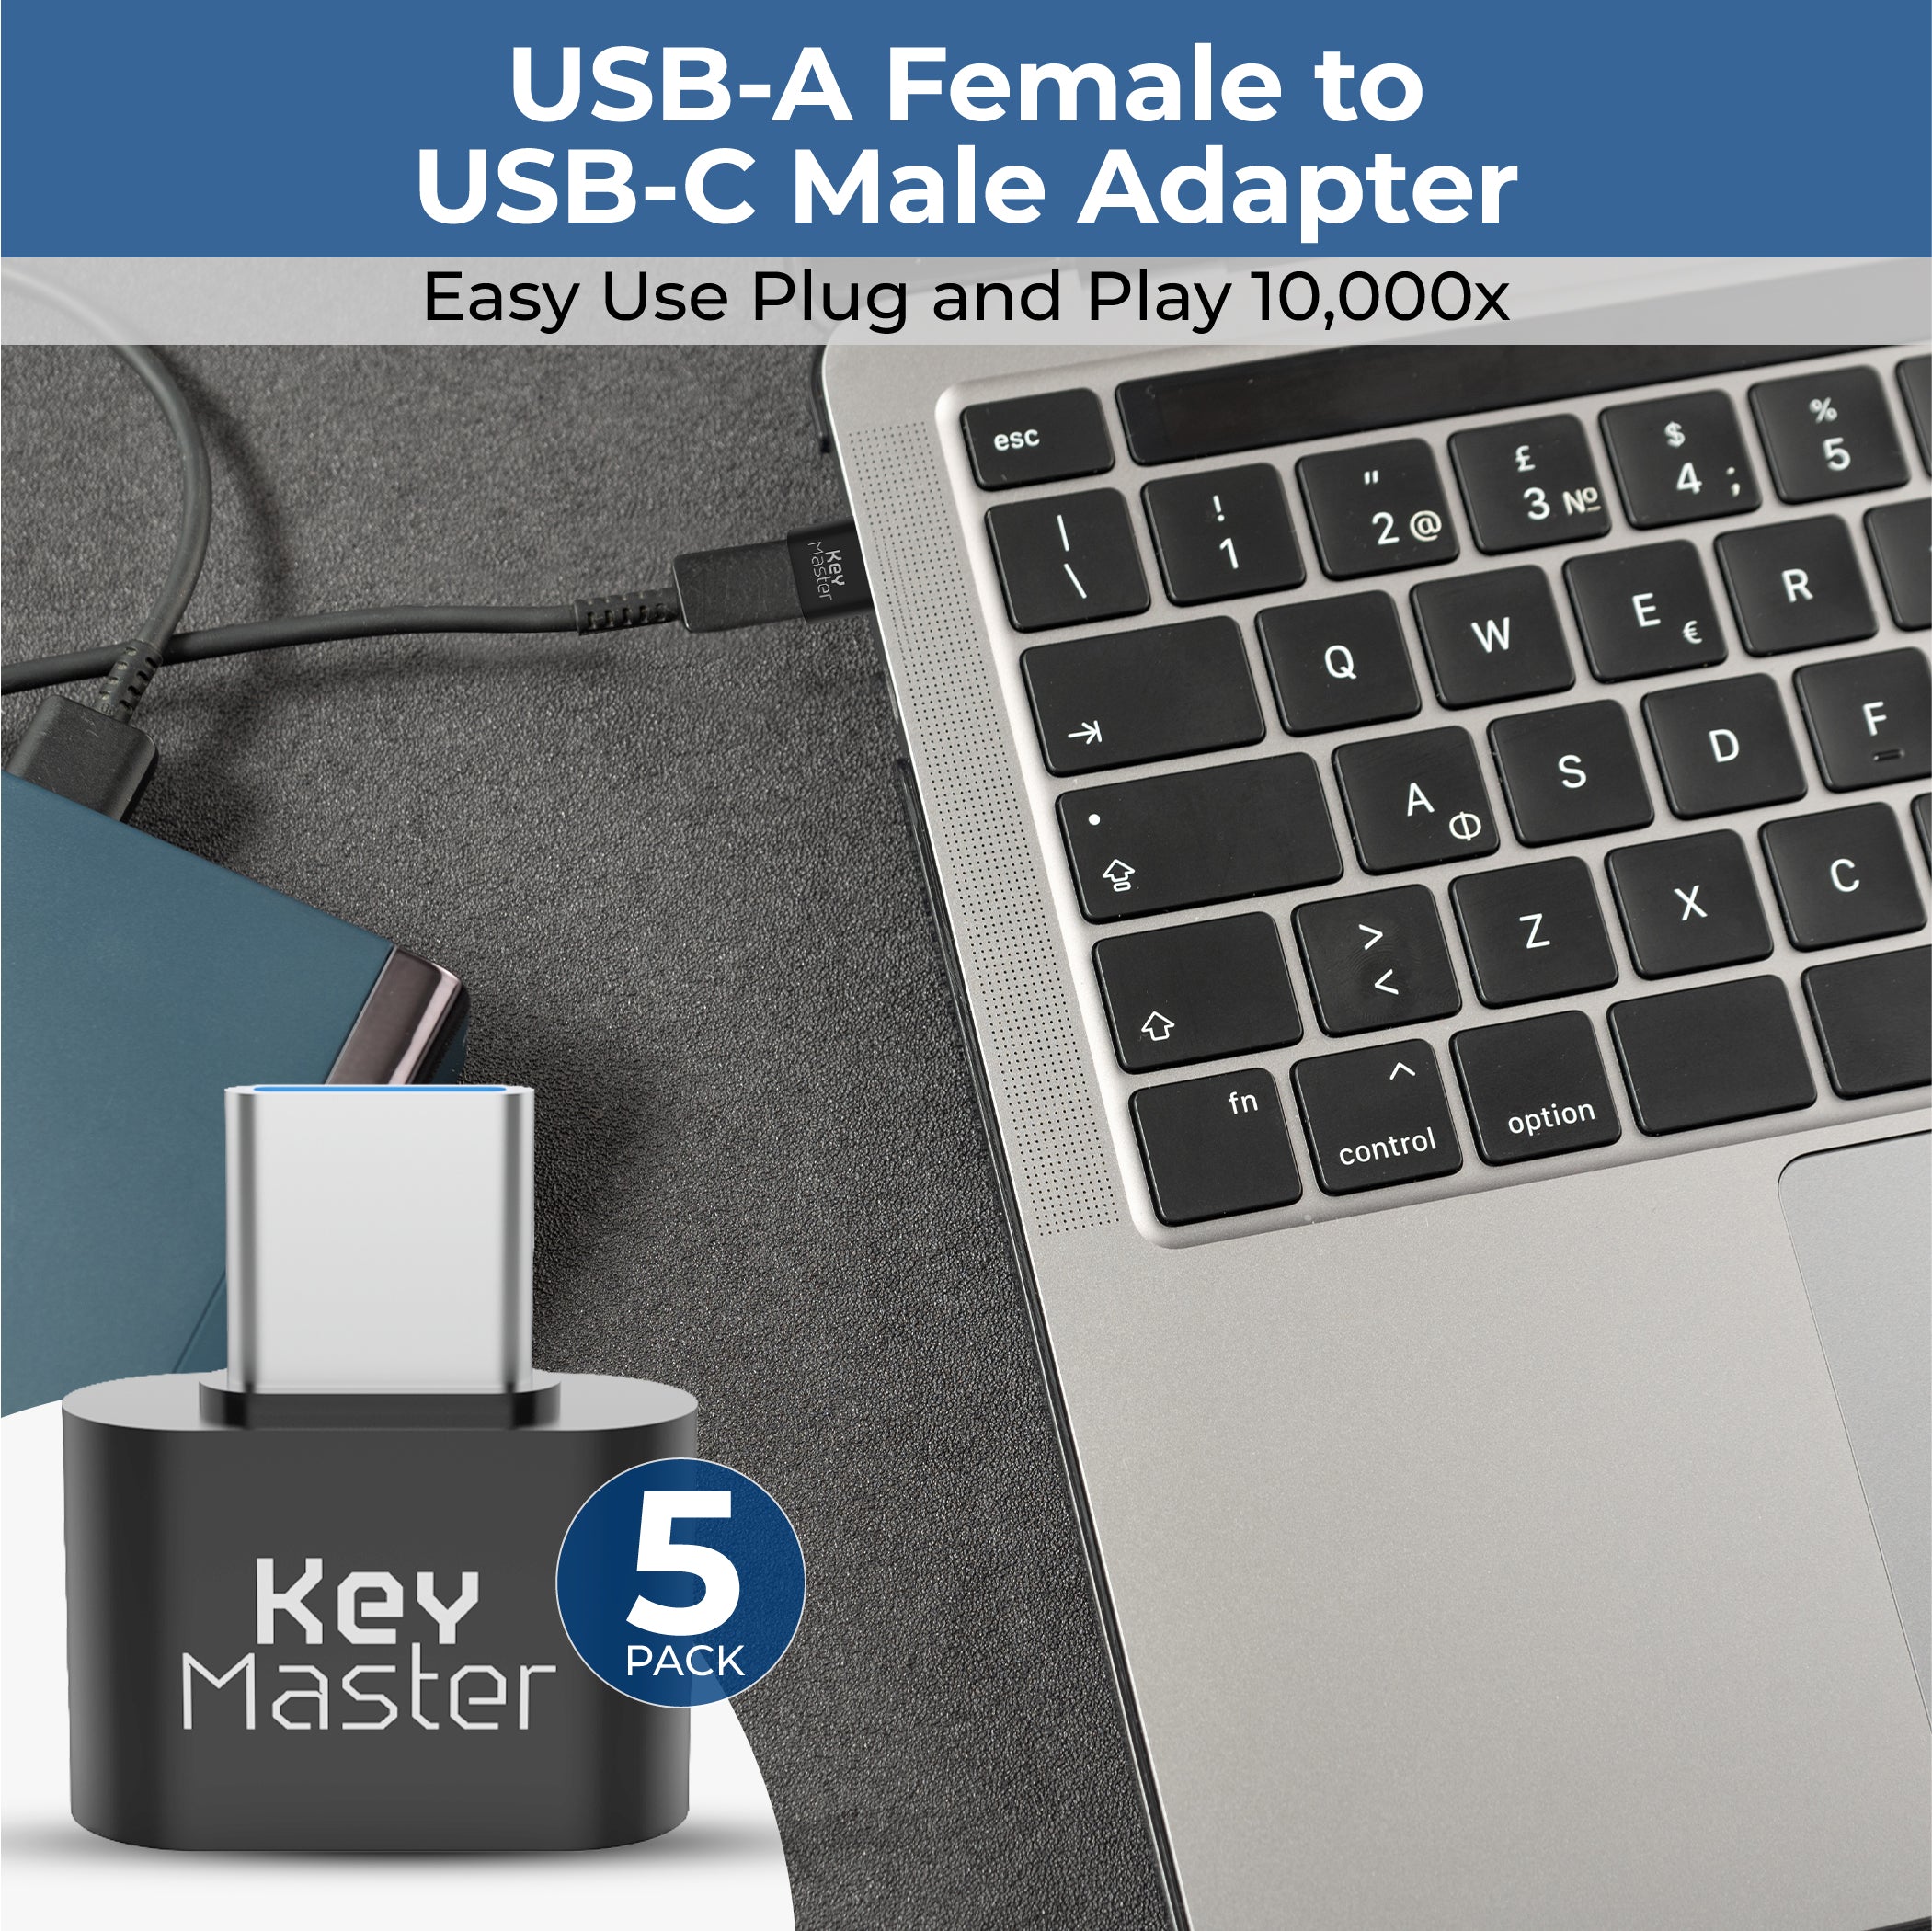 5 PACK USB-A Female to USB-C Male Adapter